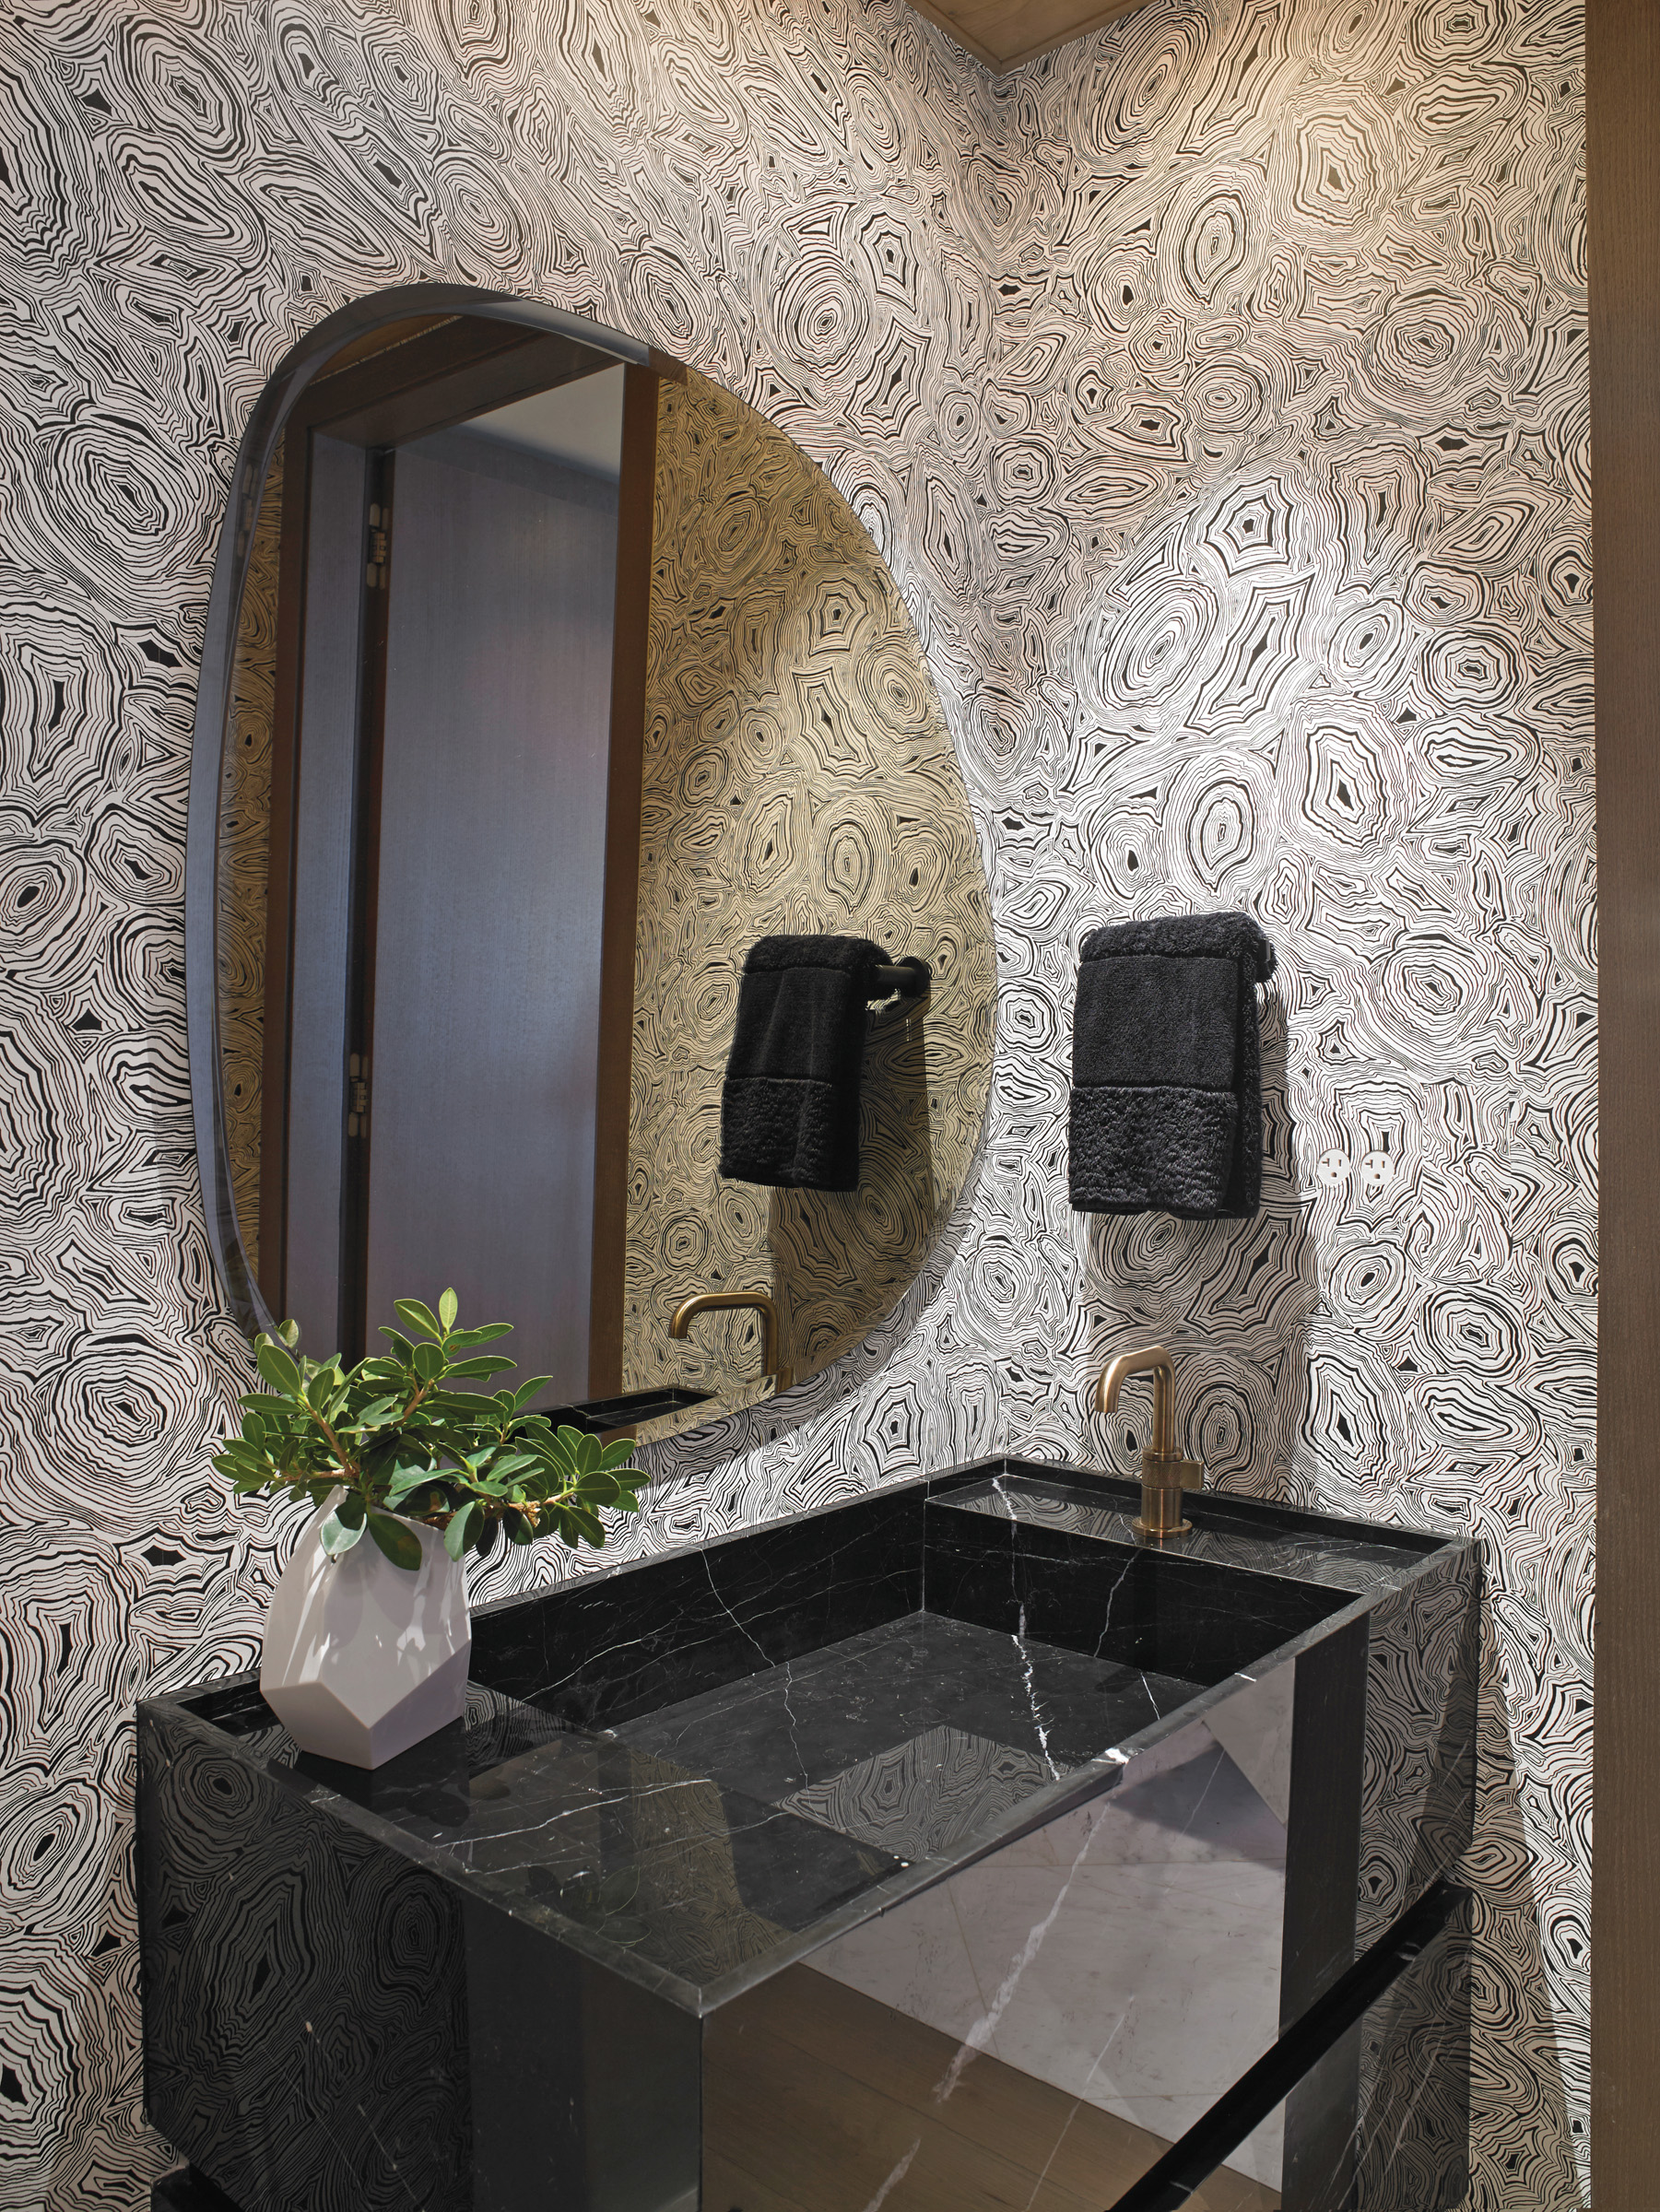 The powder room is covered in malachite-inspired wallcoverings and features a wall-mounted vanity carved from Nero Marquina marble.